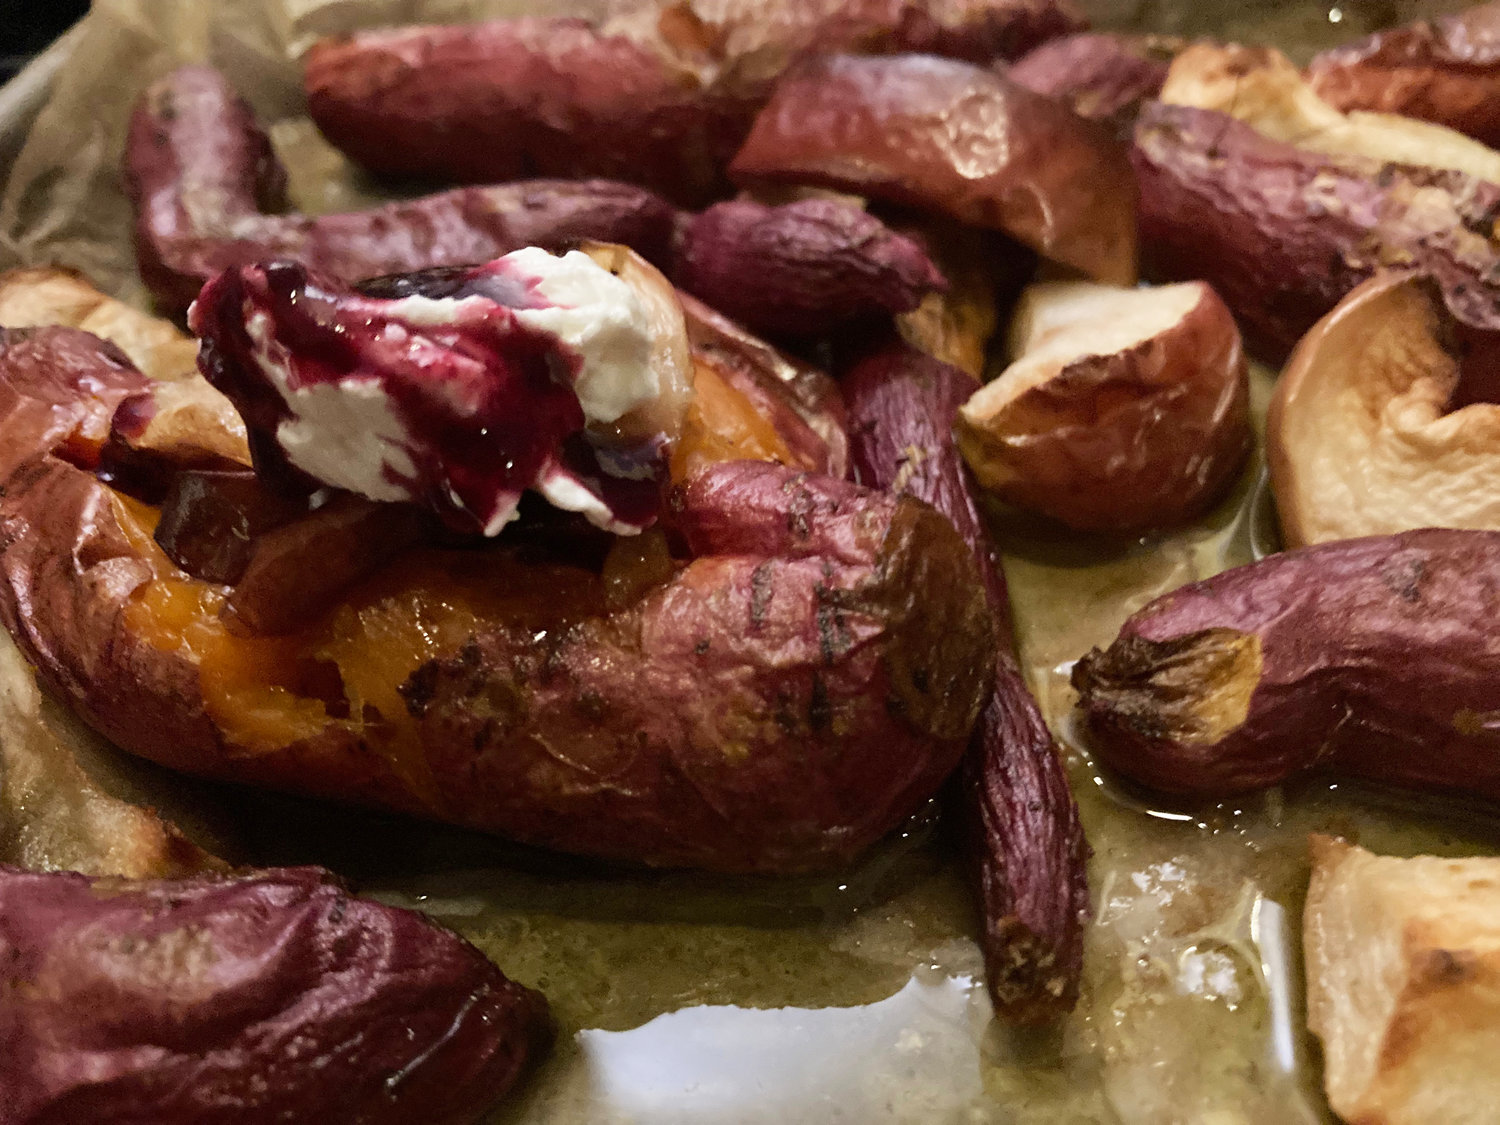 These roasted sweet potatoes are garnished with roasted apple pieces, Greek yogurt and a Concord grape drizzle.